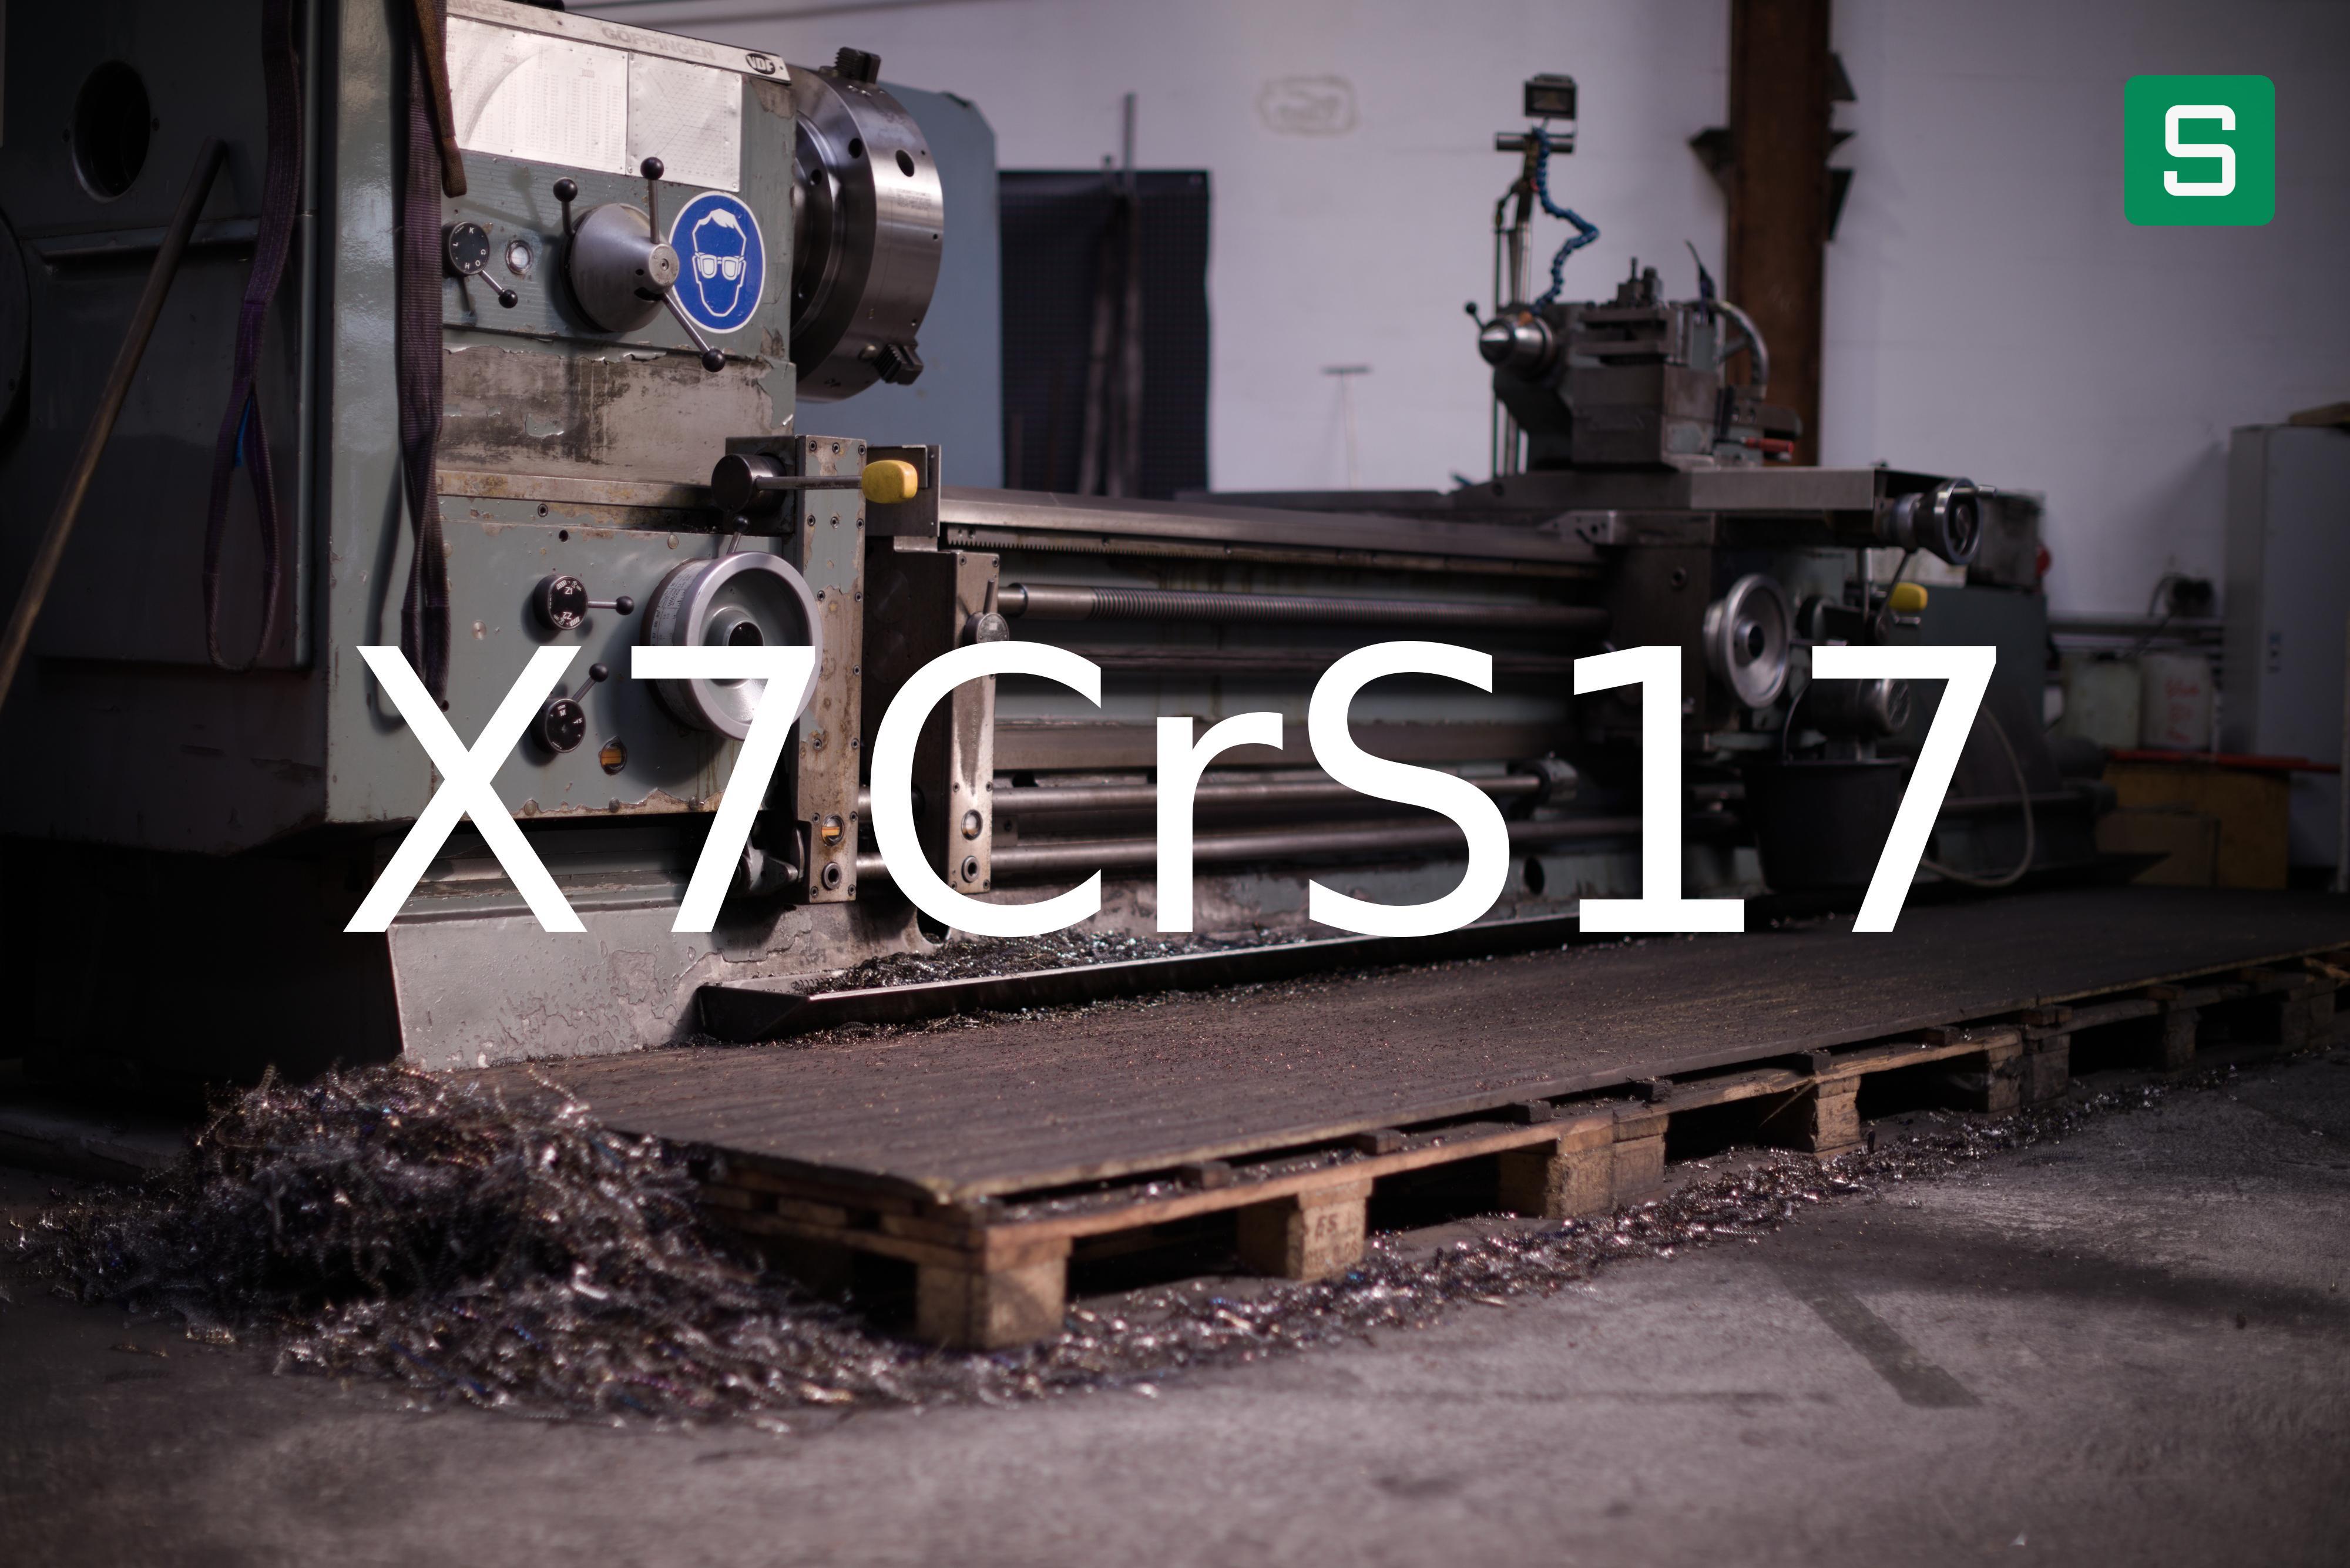 Steel Material: X7CrS17